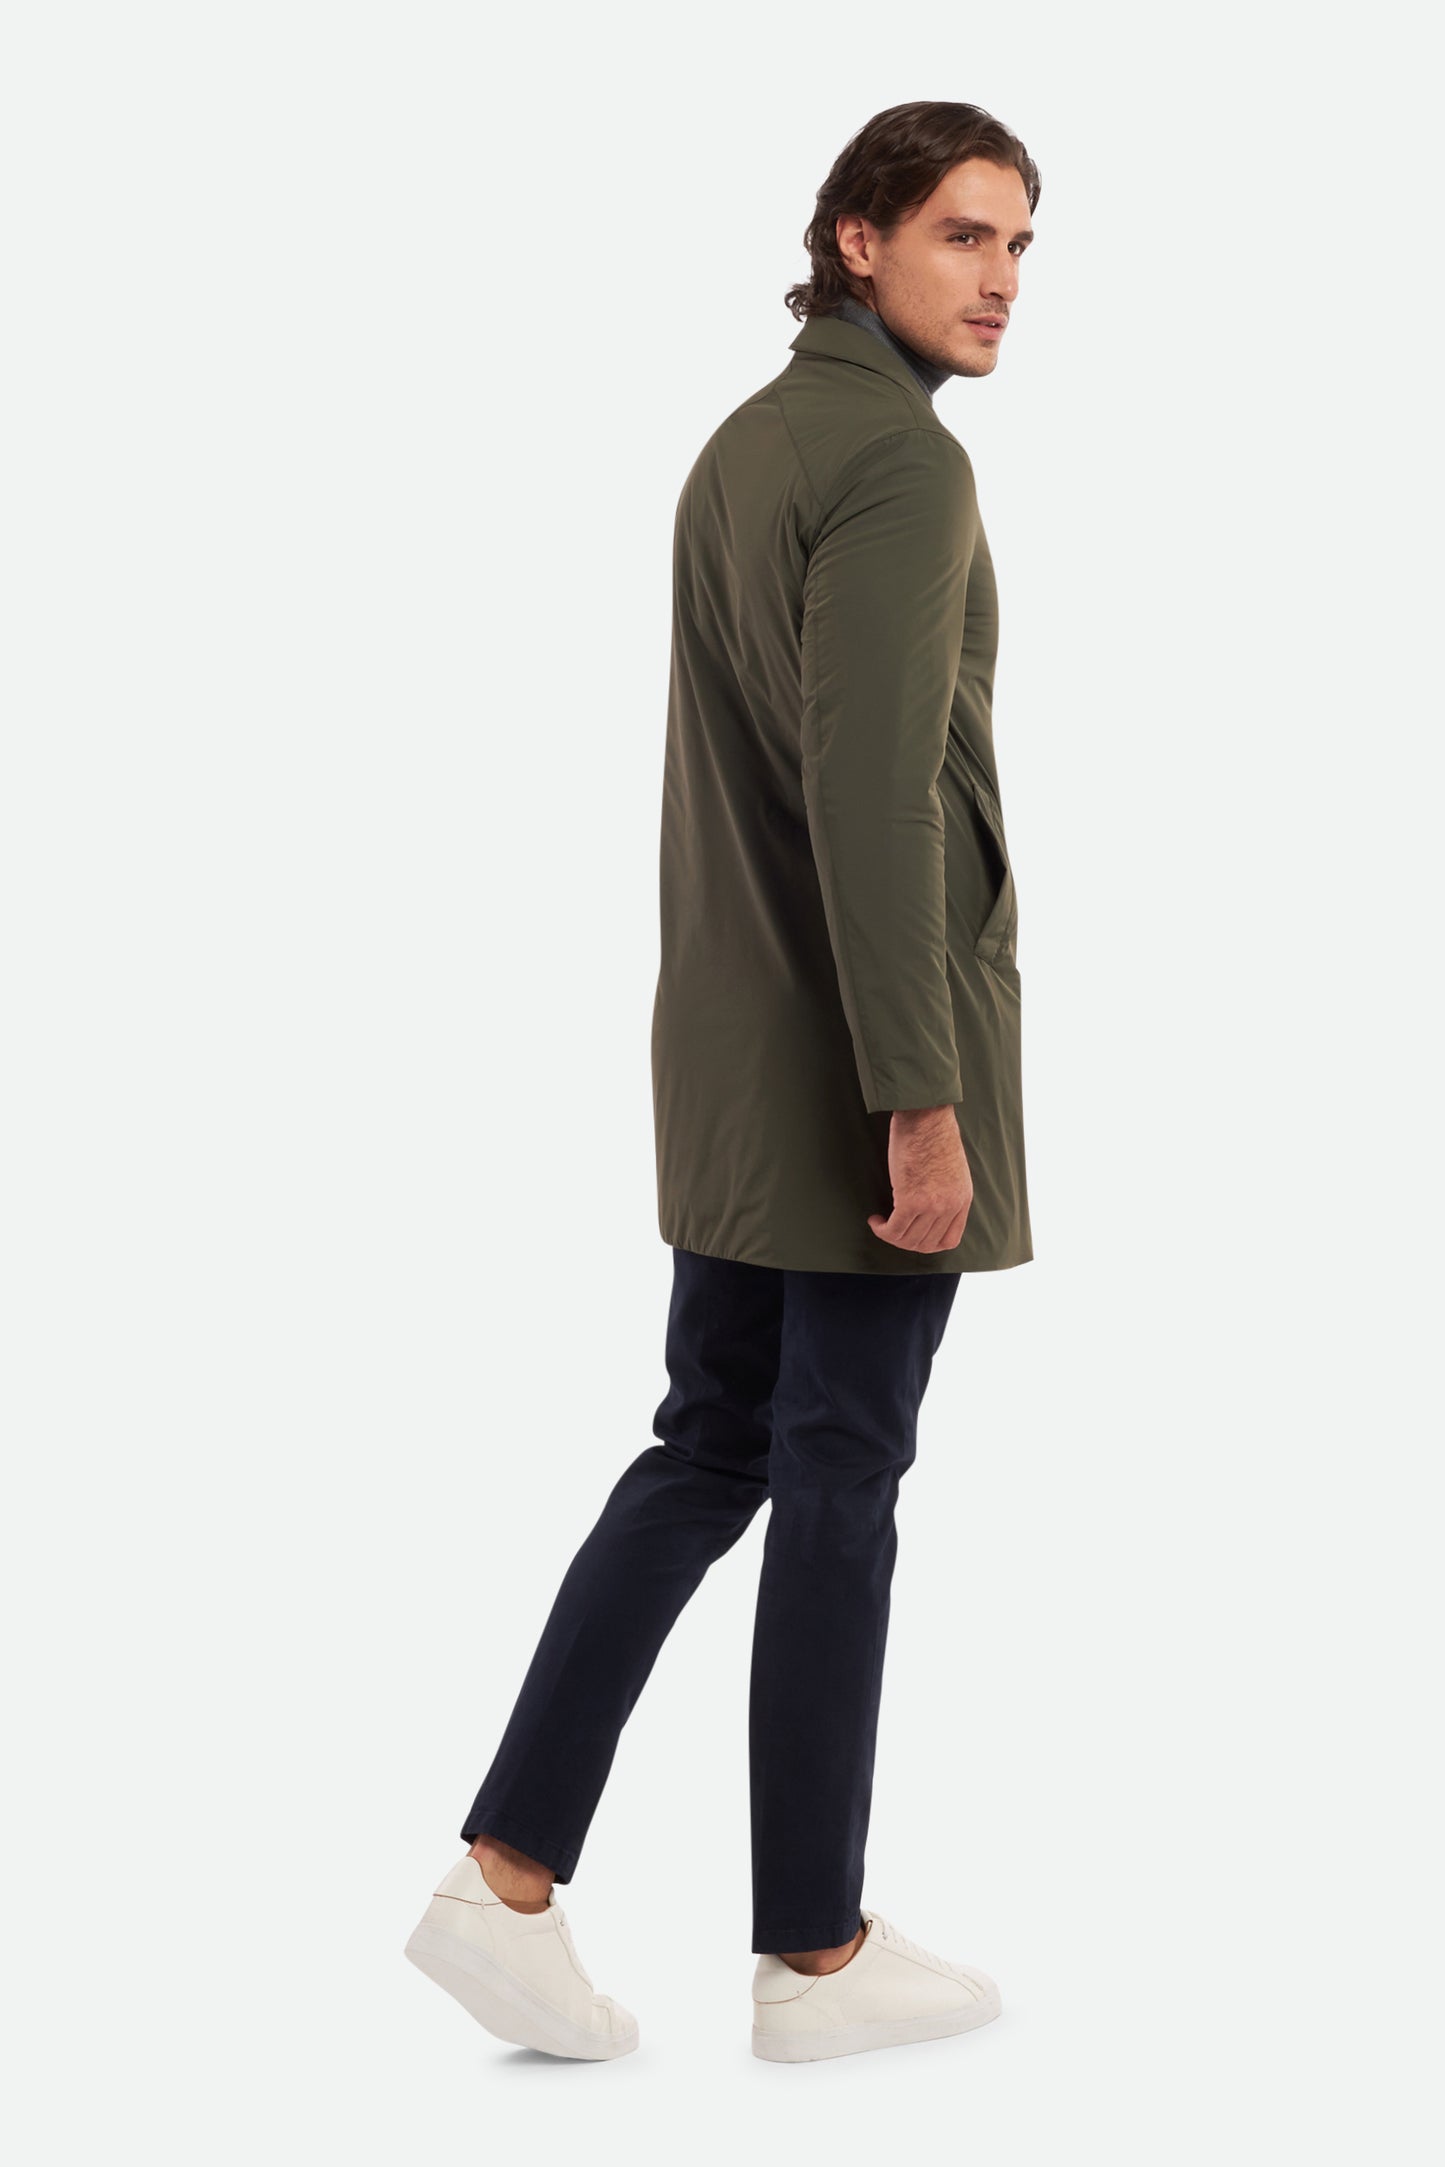 EXAMPLE
Esemplare single-breasted trench coat